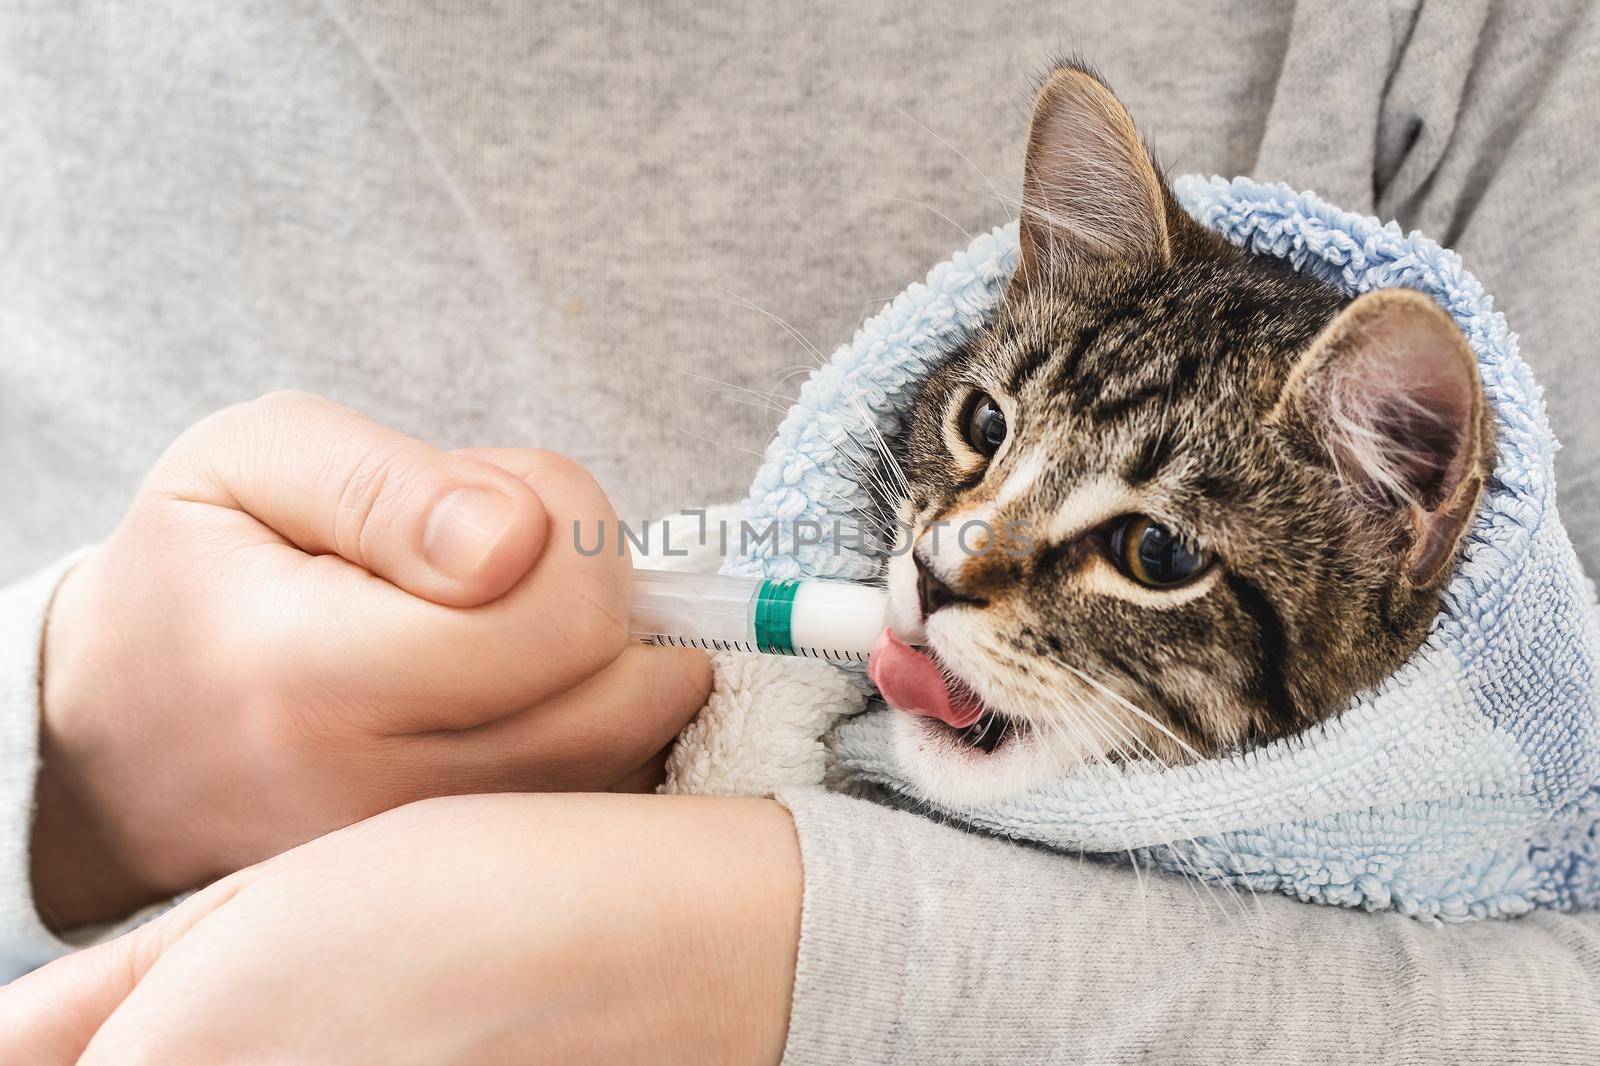 Kitten wrapped in a towel drinks medicine from a syringe.